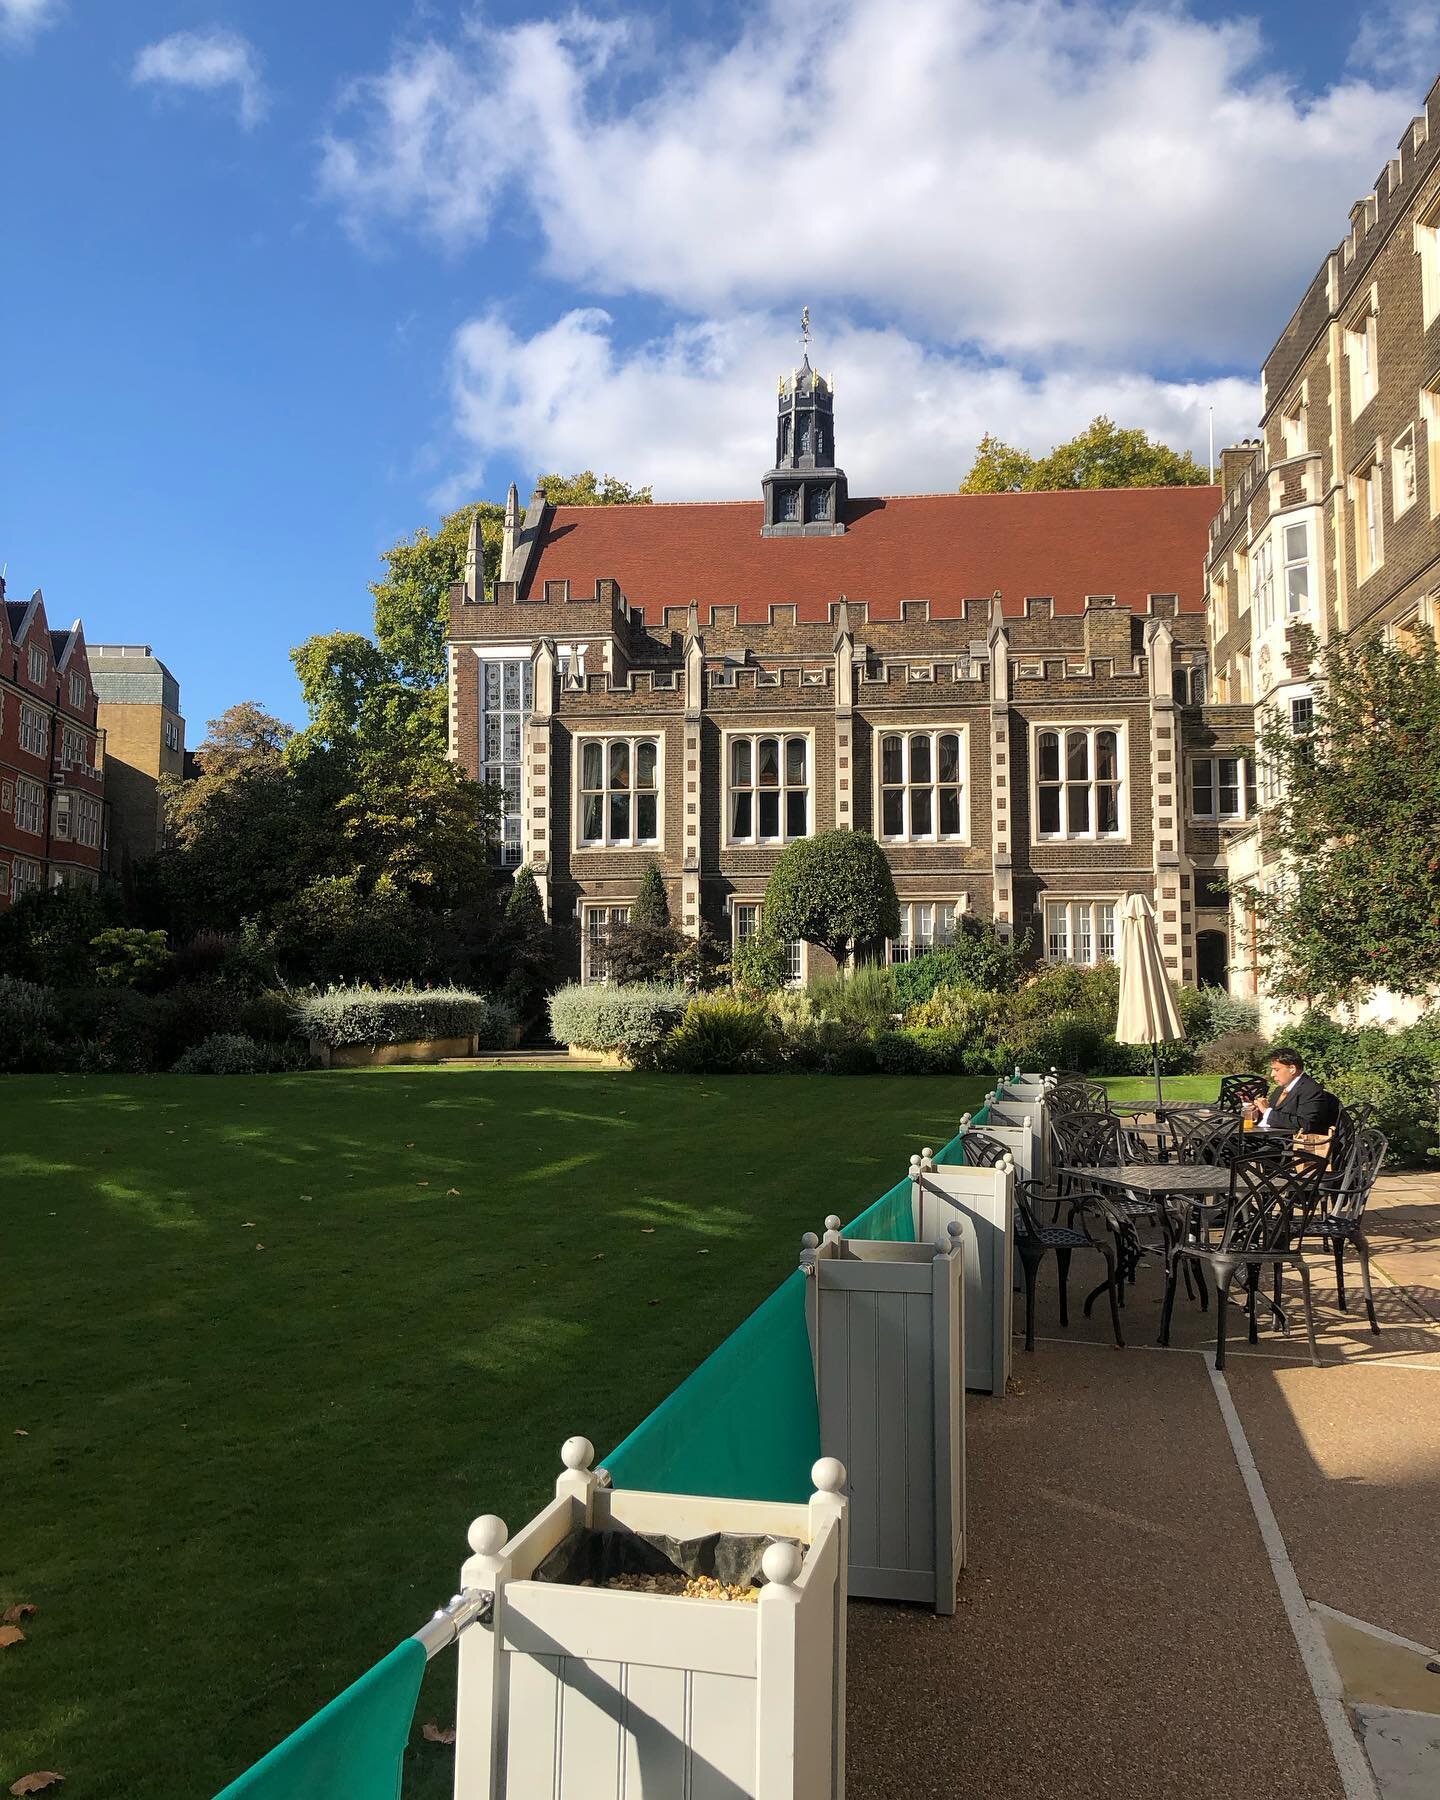 The beautiful Middle Temple Hall looking glorious in the sunshine today! Excited for lunches with this view on our October half-term law courses 📚✏️